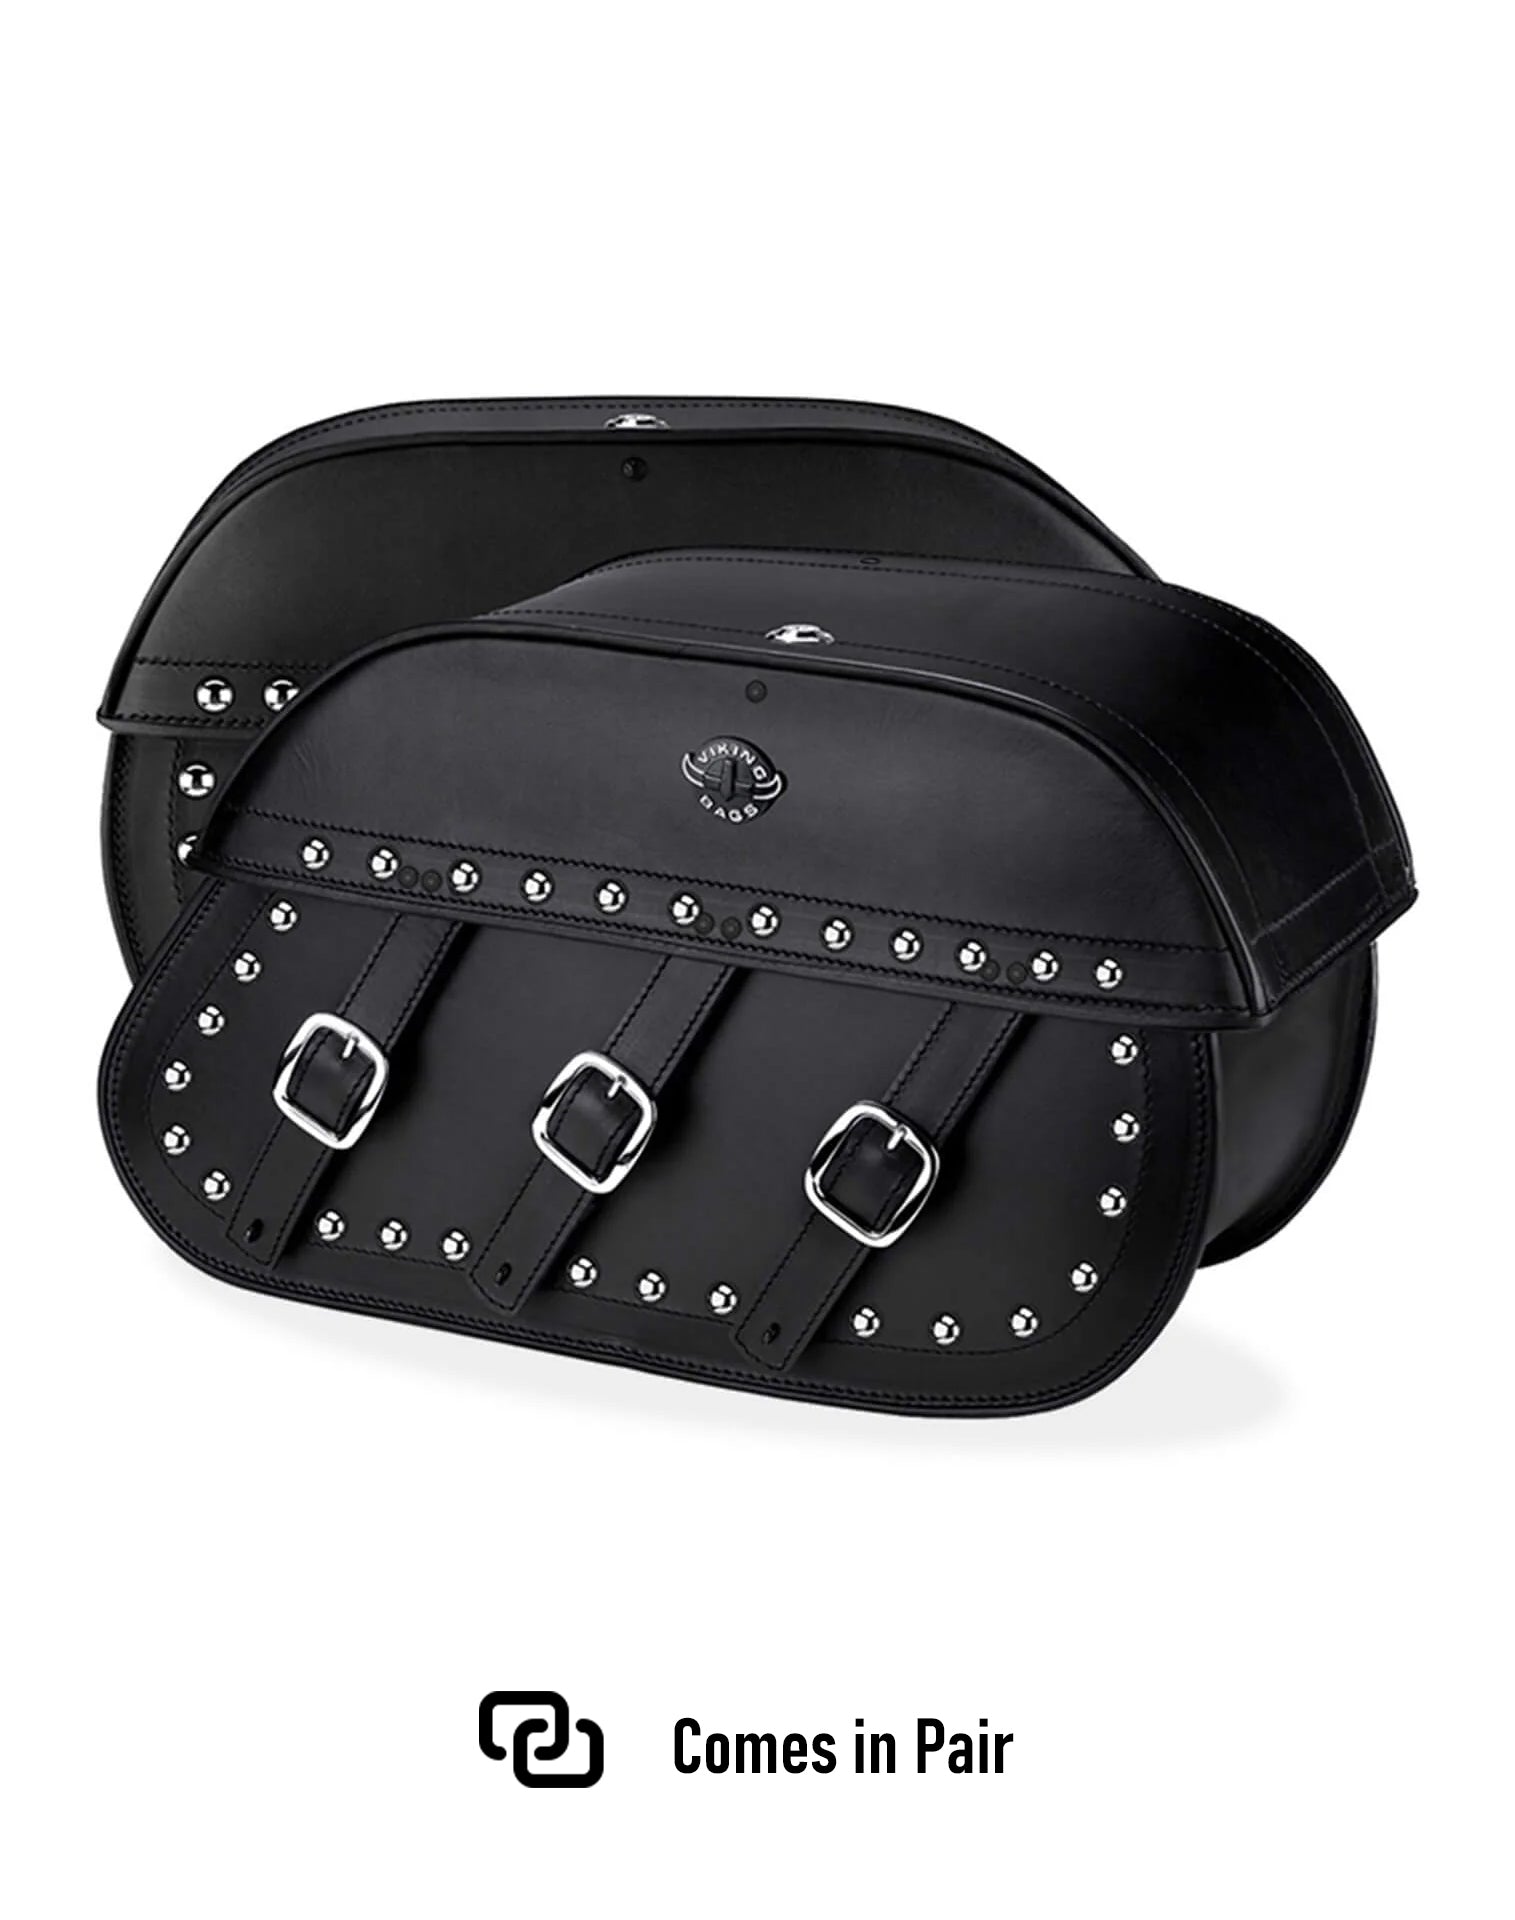 Viking Trianon Extra Large Victory Kingpin Studded Leather Motorcycle Saddlebags Weather Resistant Bags Comes in Pair